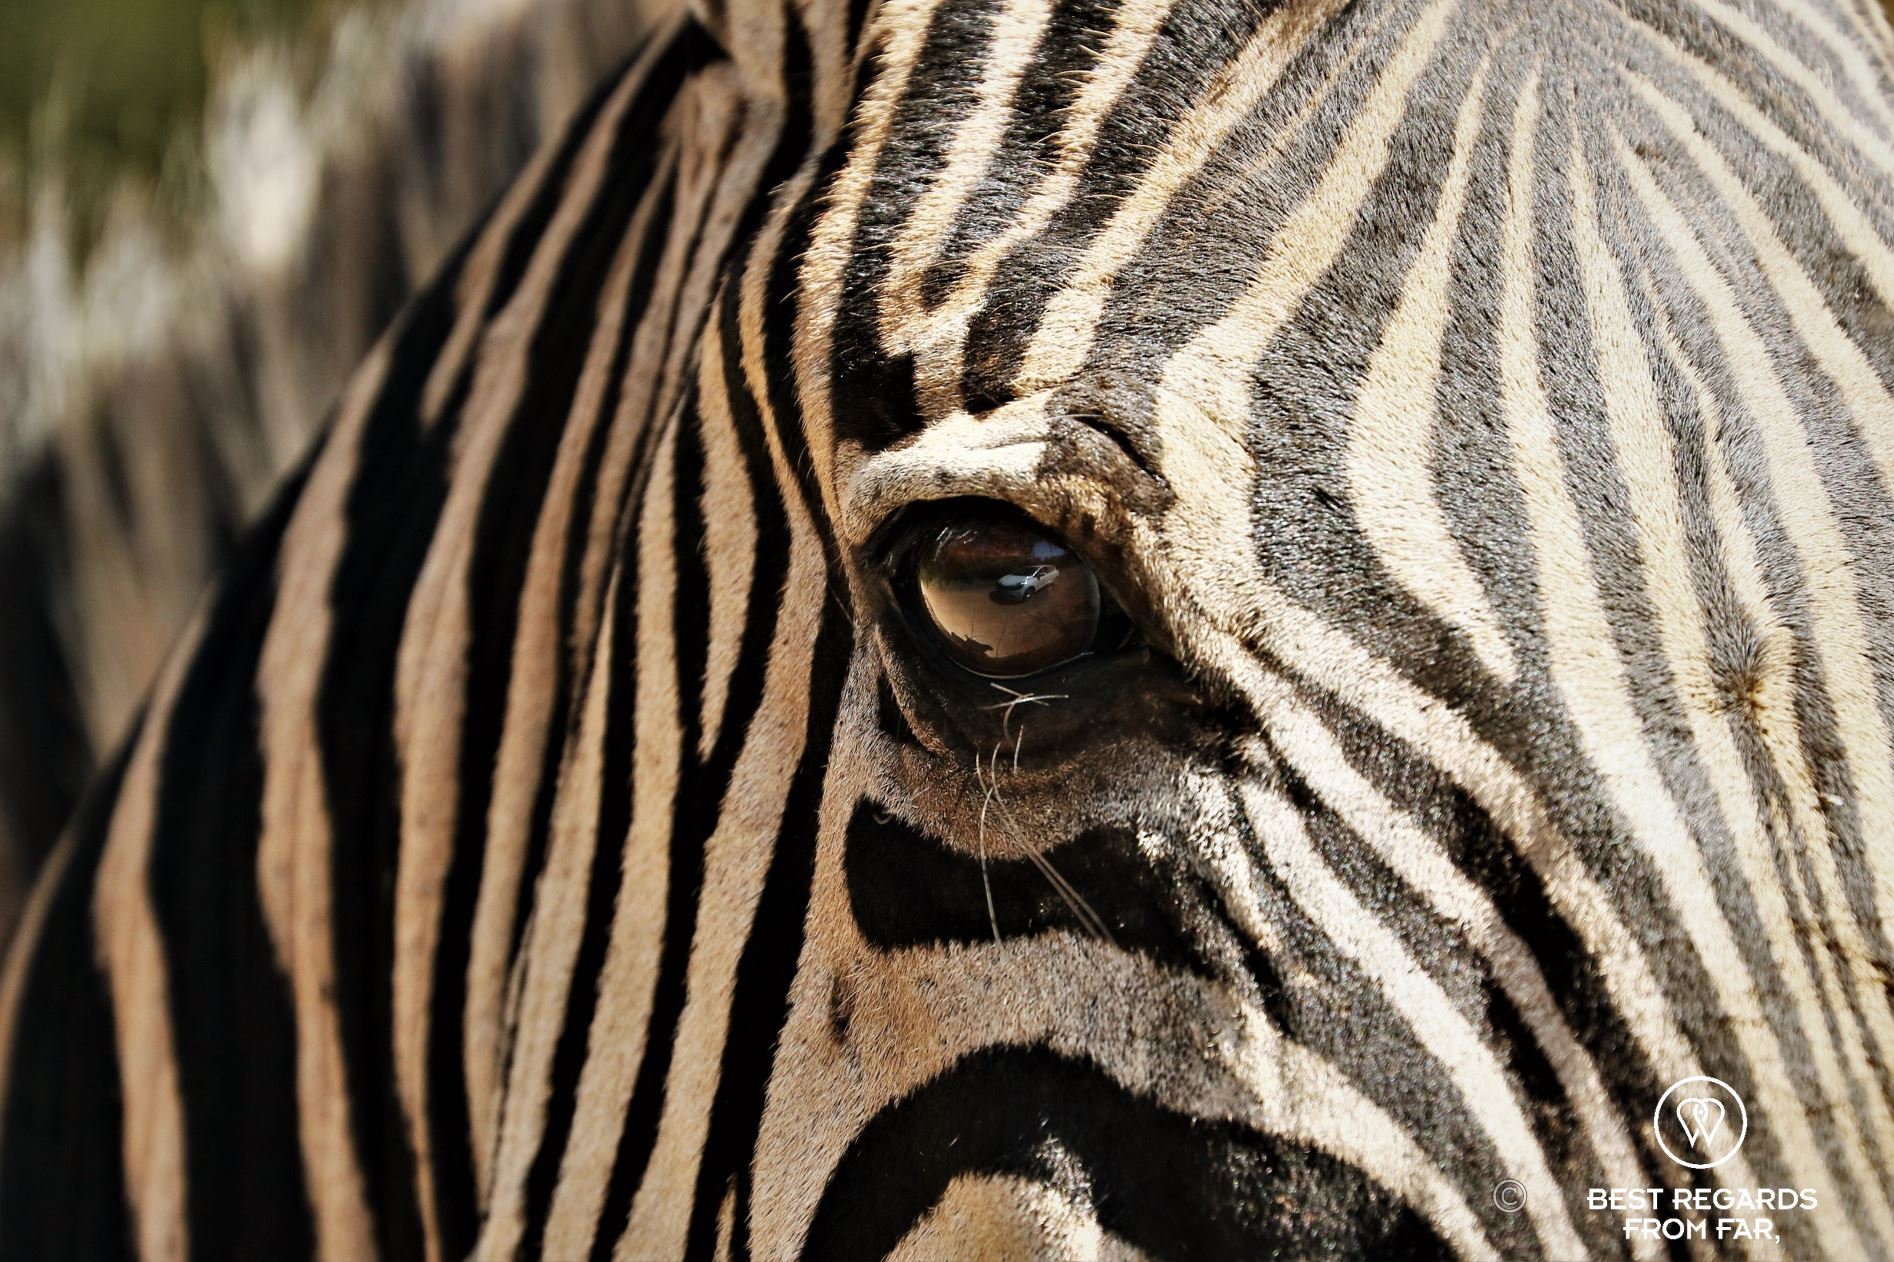 Close-up of a zebra in the wild, Hluhluwe iMfoloze, South Africa.